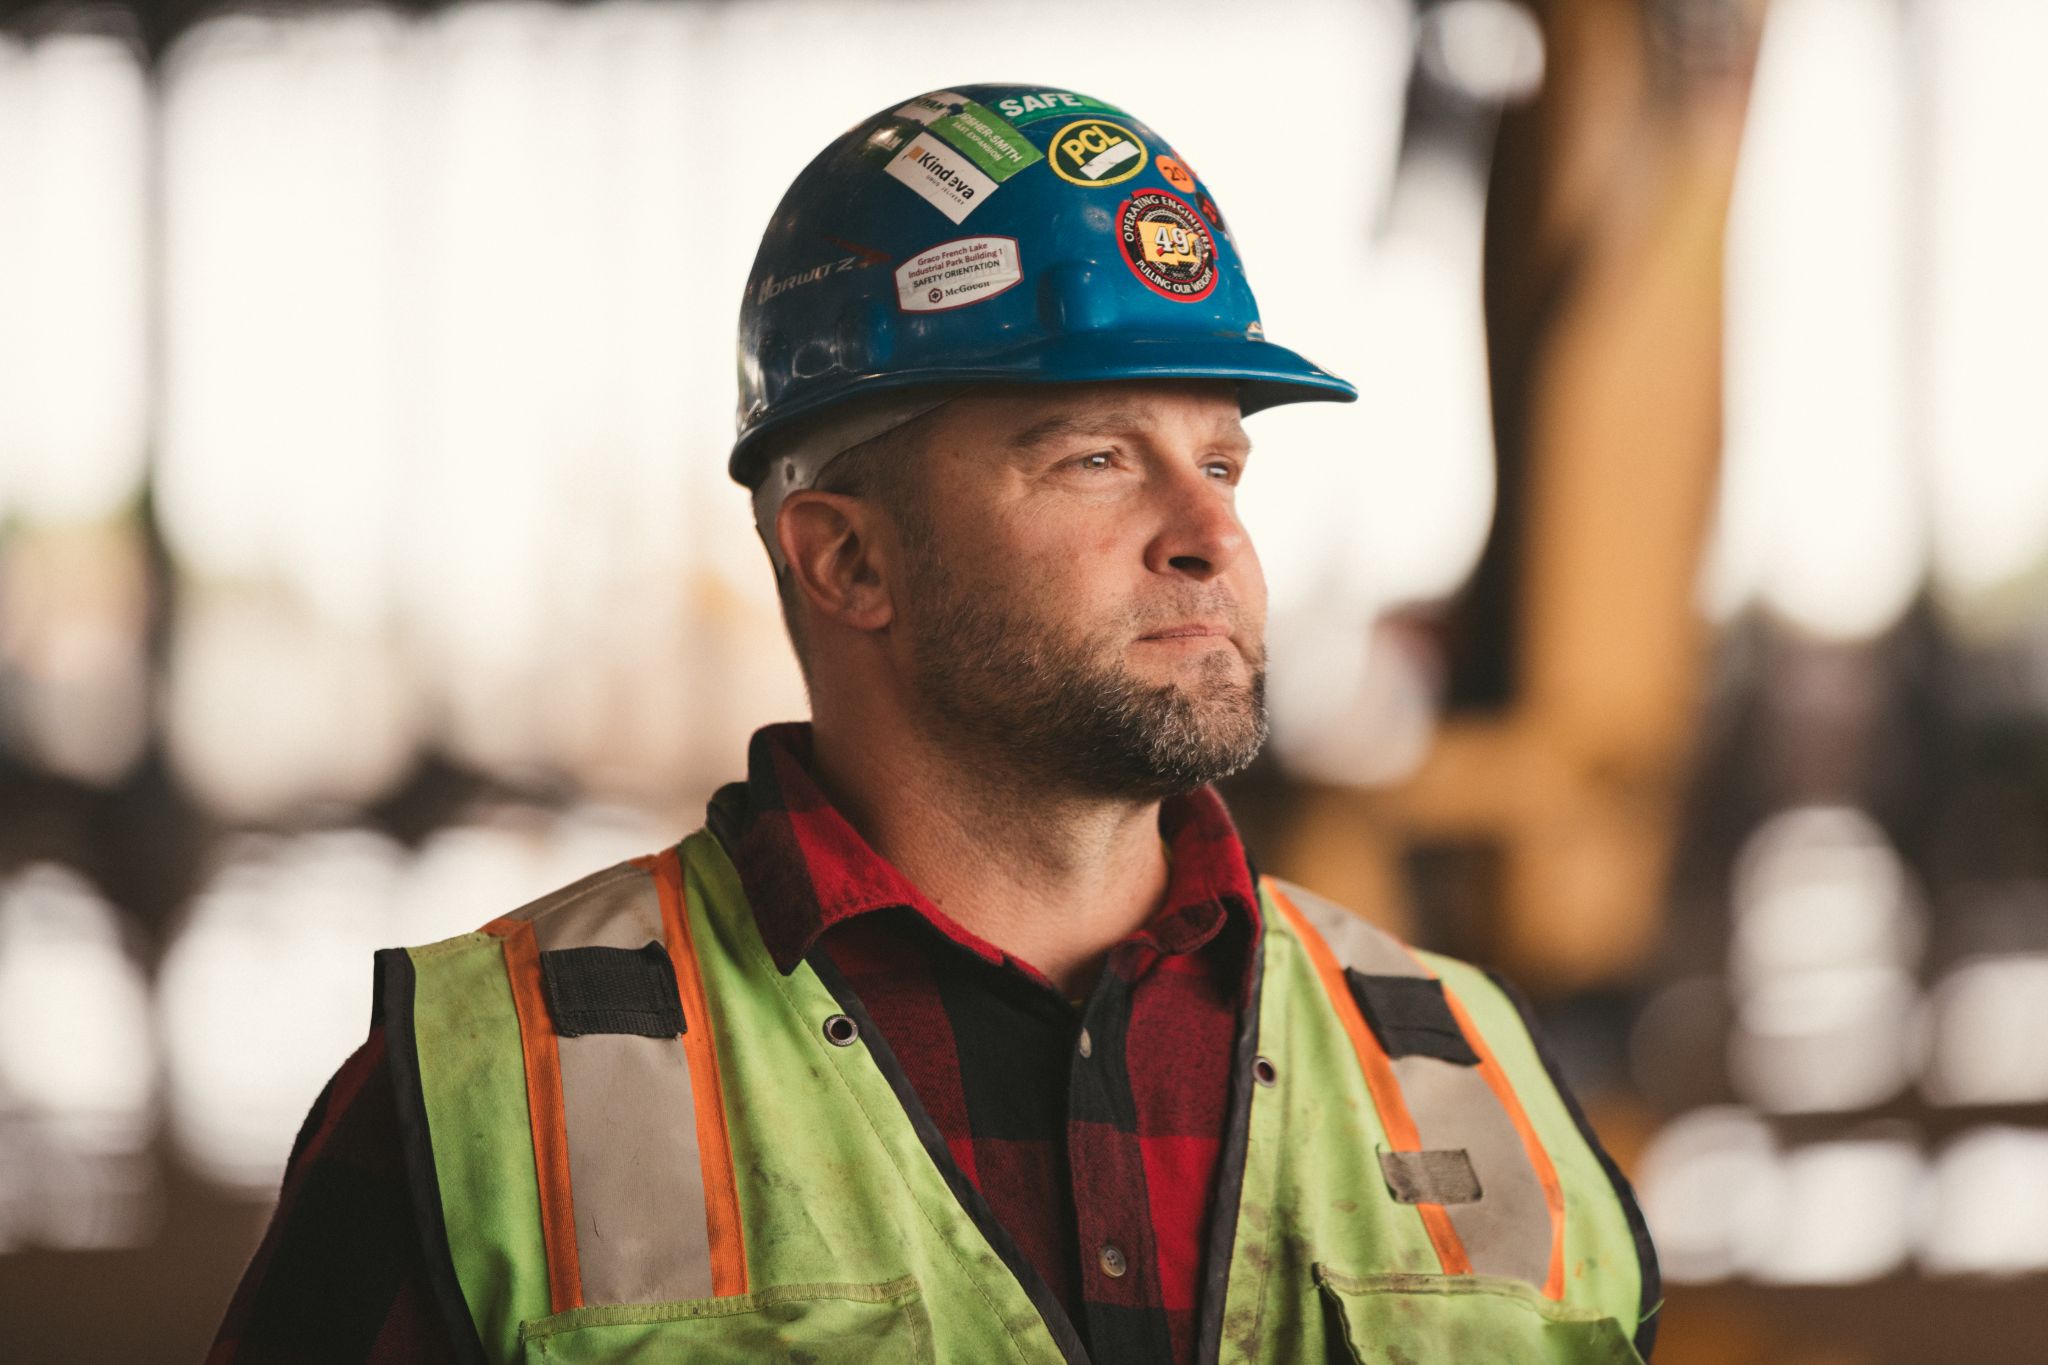 Closeup headshot of man with a short beard and hair wearing a red flannel shirt, safety vest and blue hardhat looking off to the side